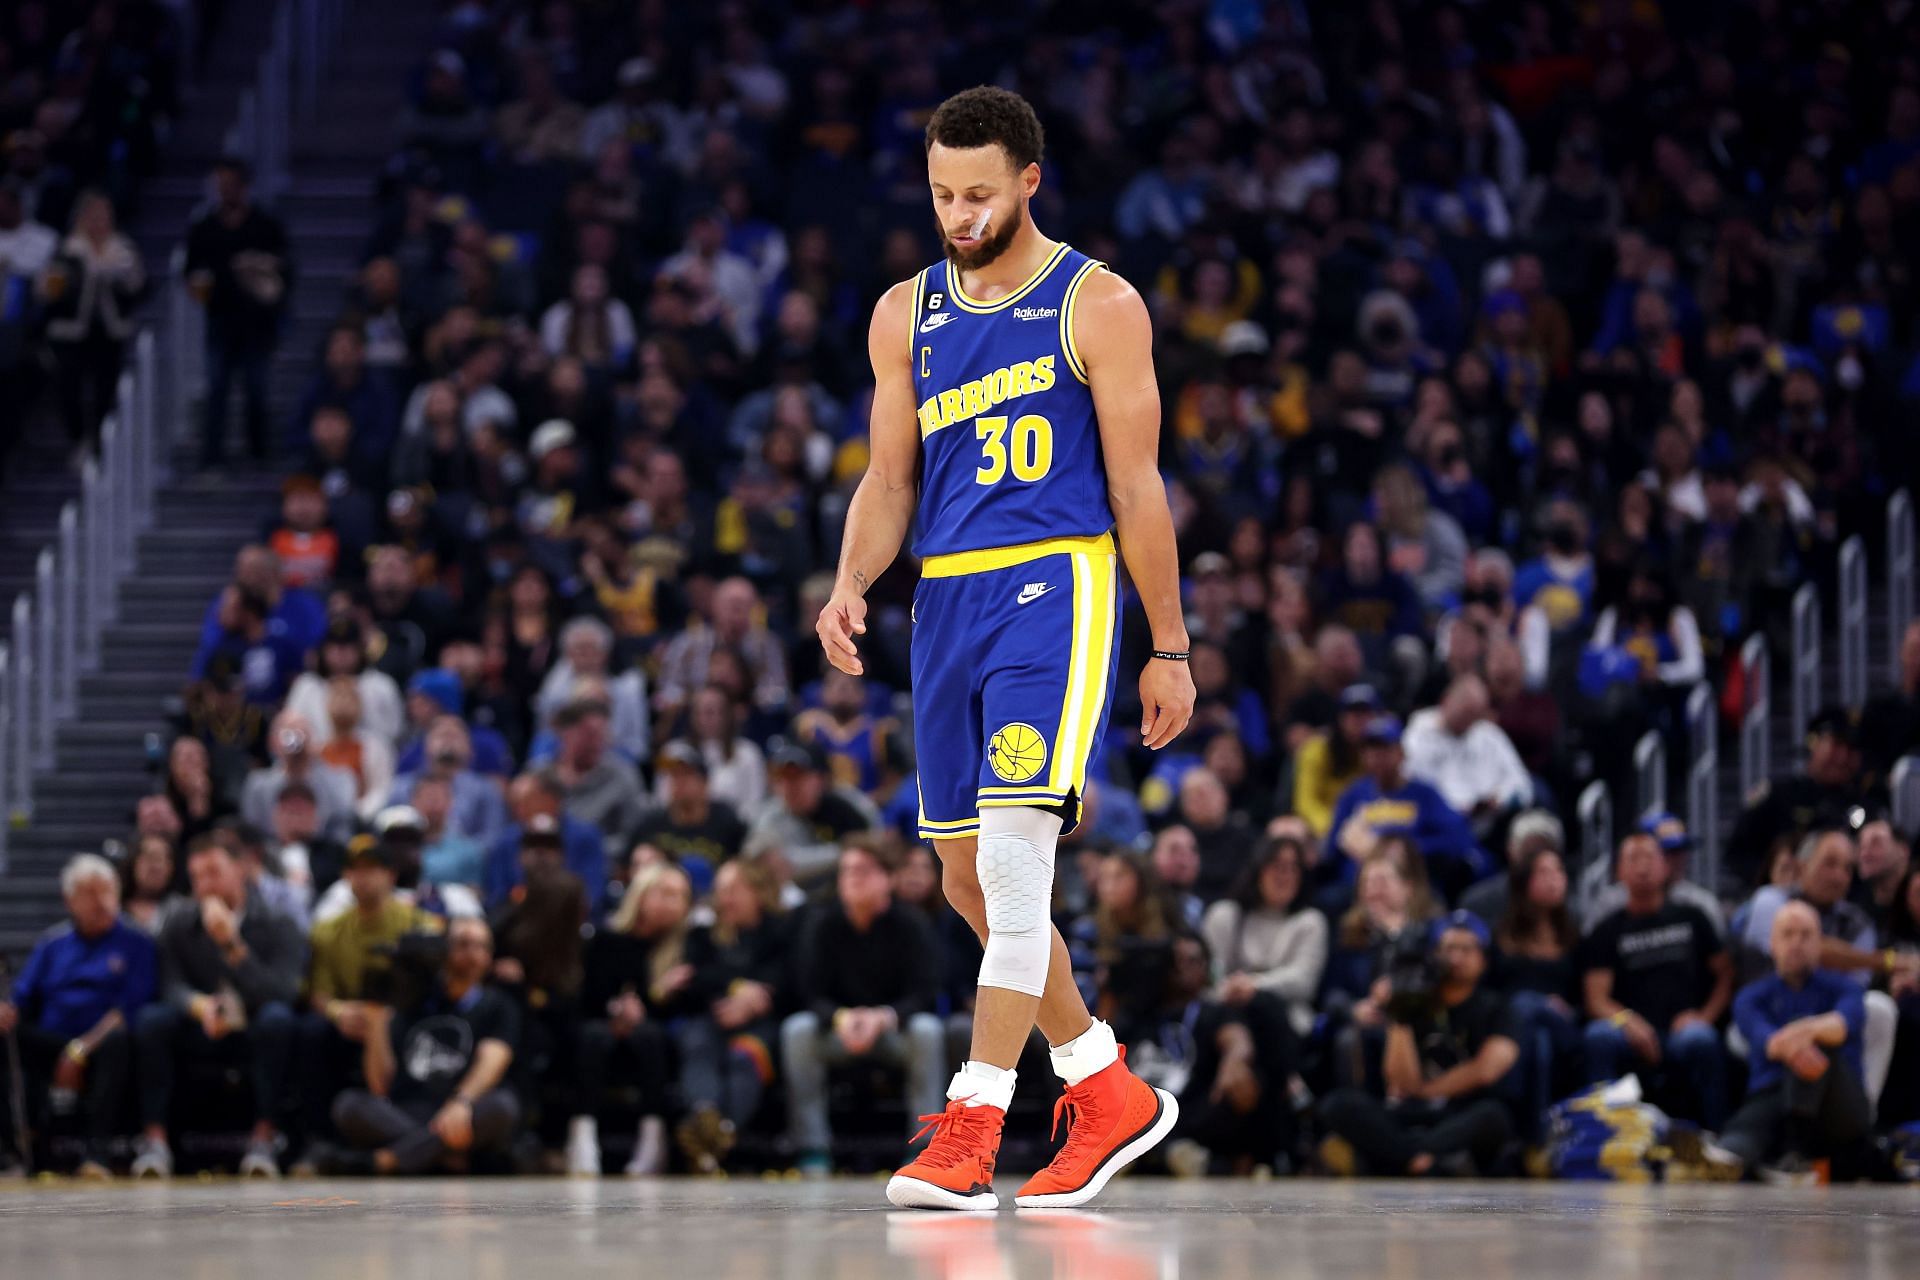 Curry will not play against the Utah Jazz on Wednesday night.